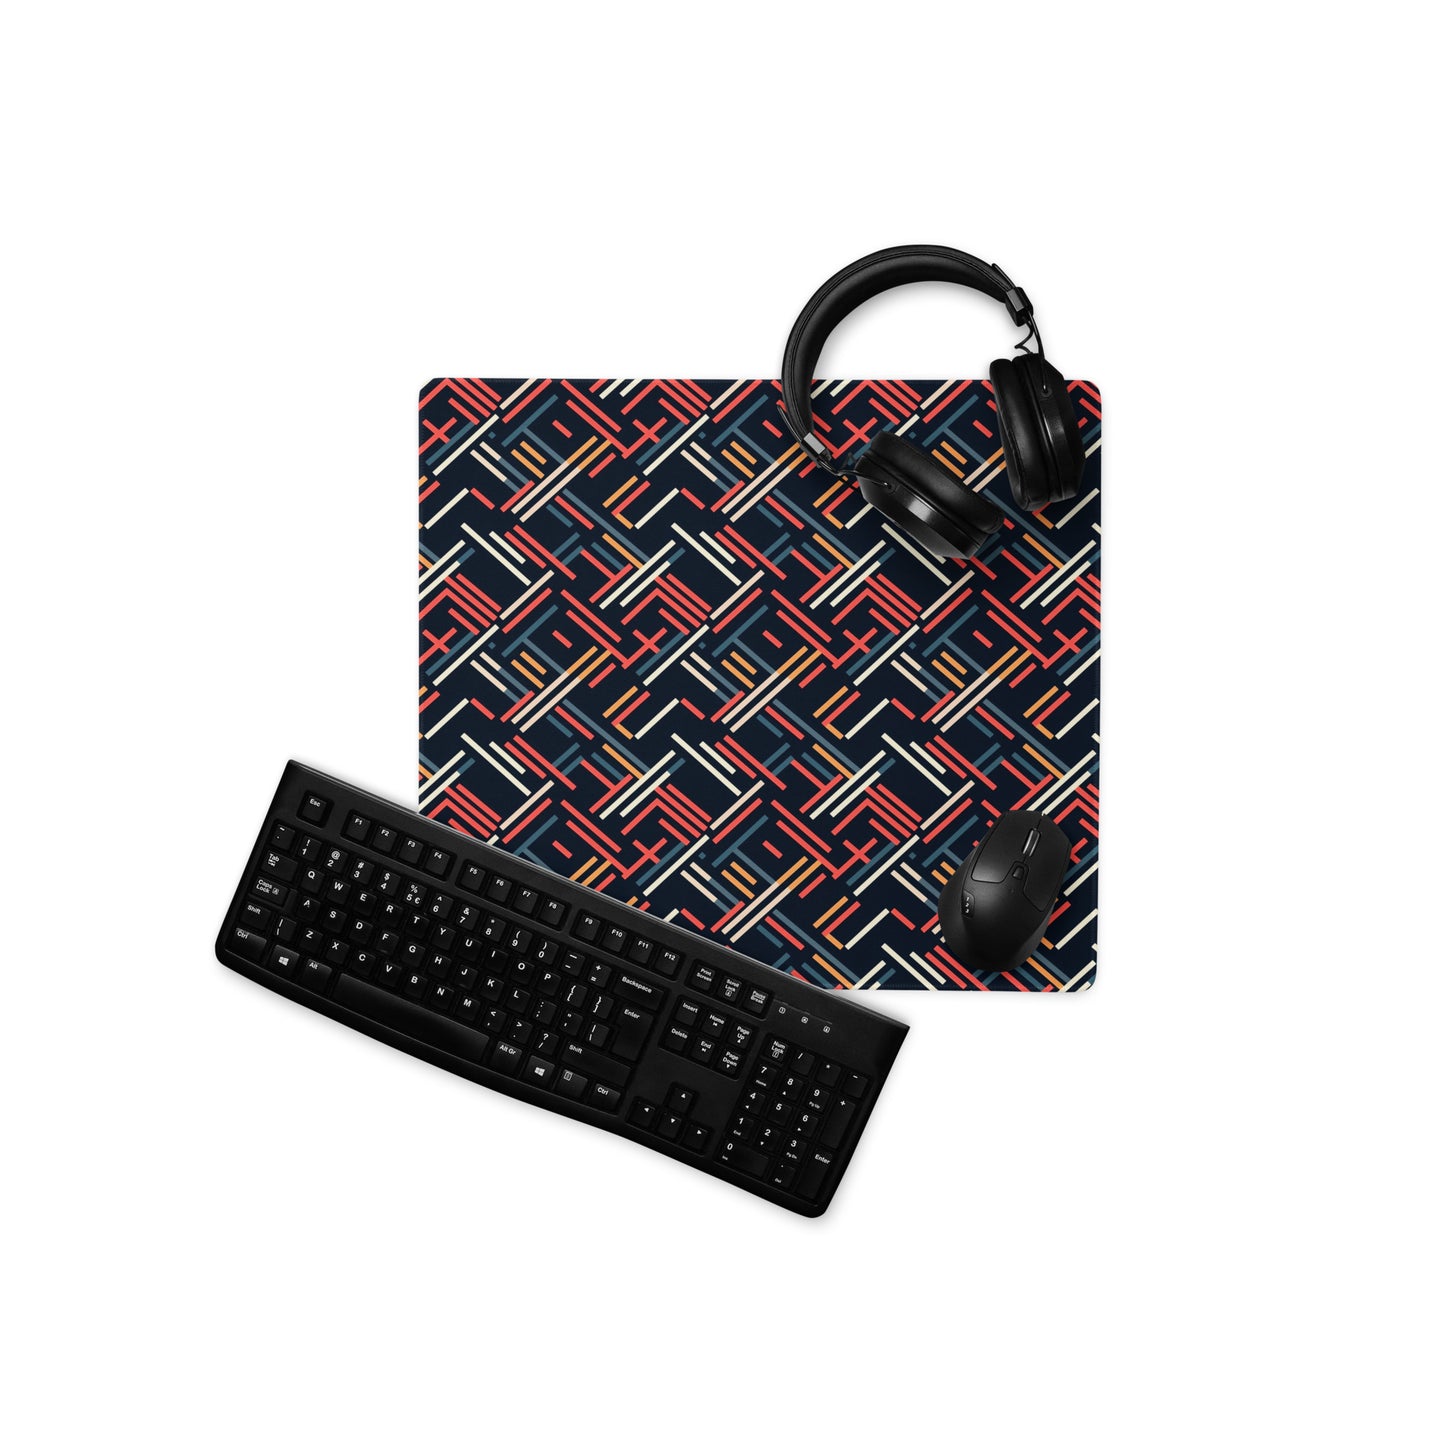 An 18" x 16" gaming desk pad with red, blue, white, and orange lines on a black background. A keyboard, mouse, and headphones sit on it.